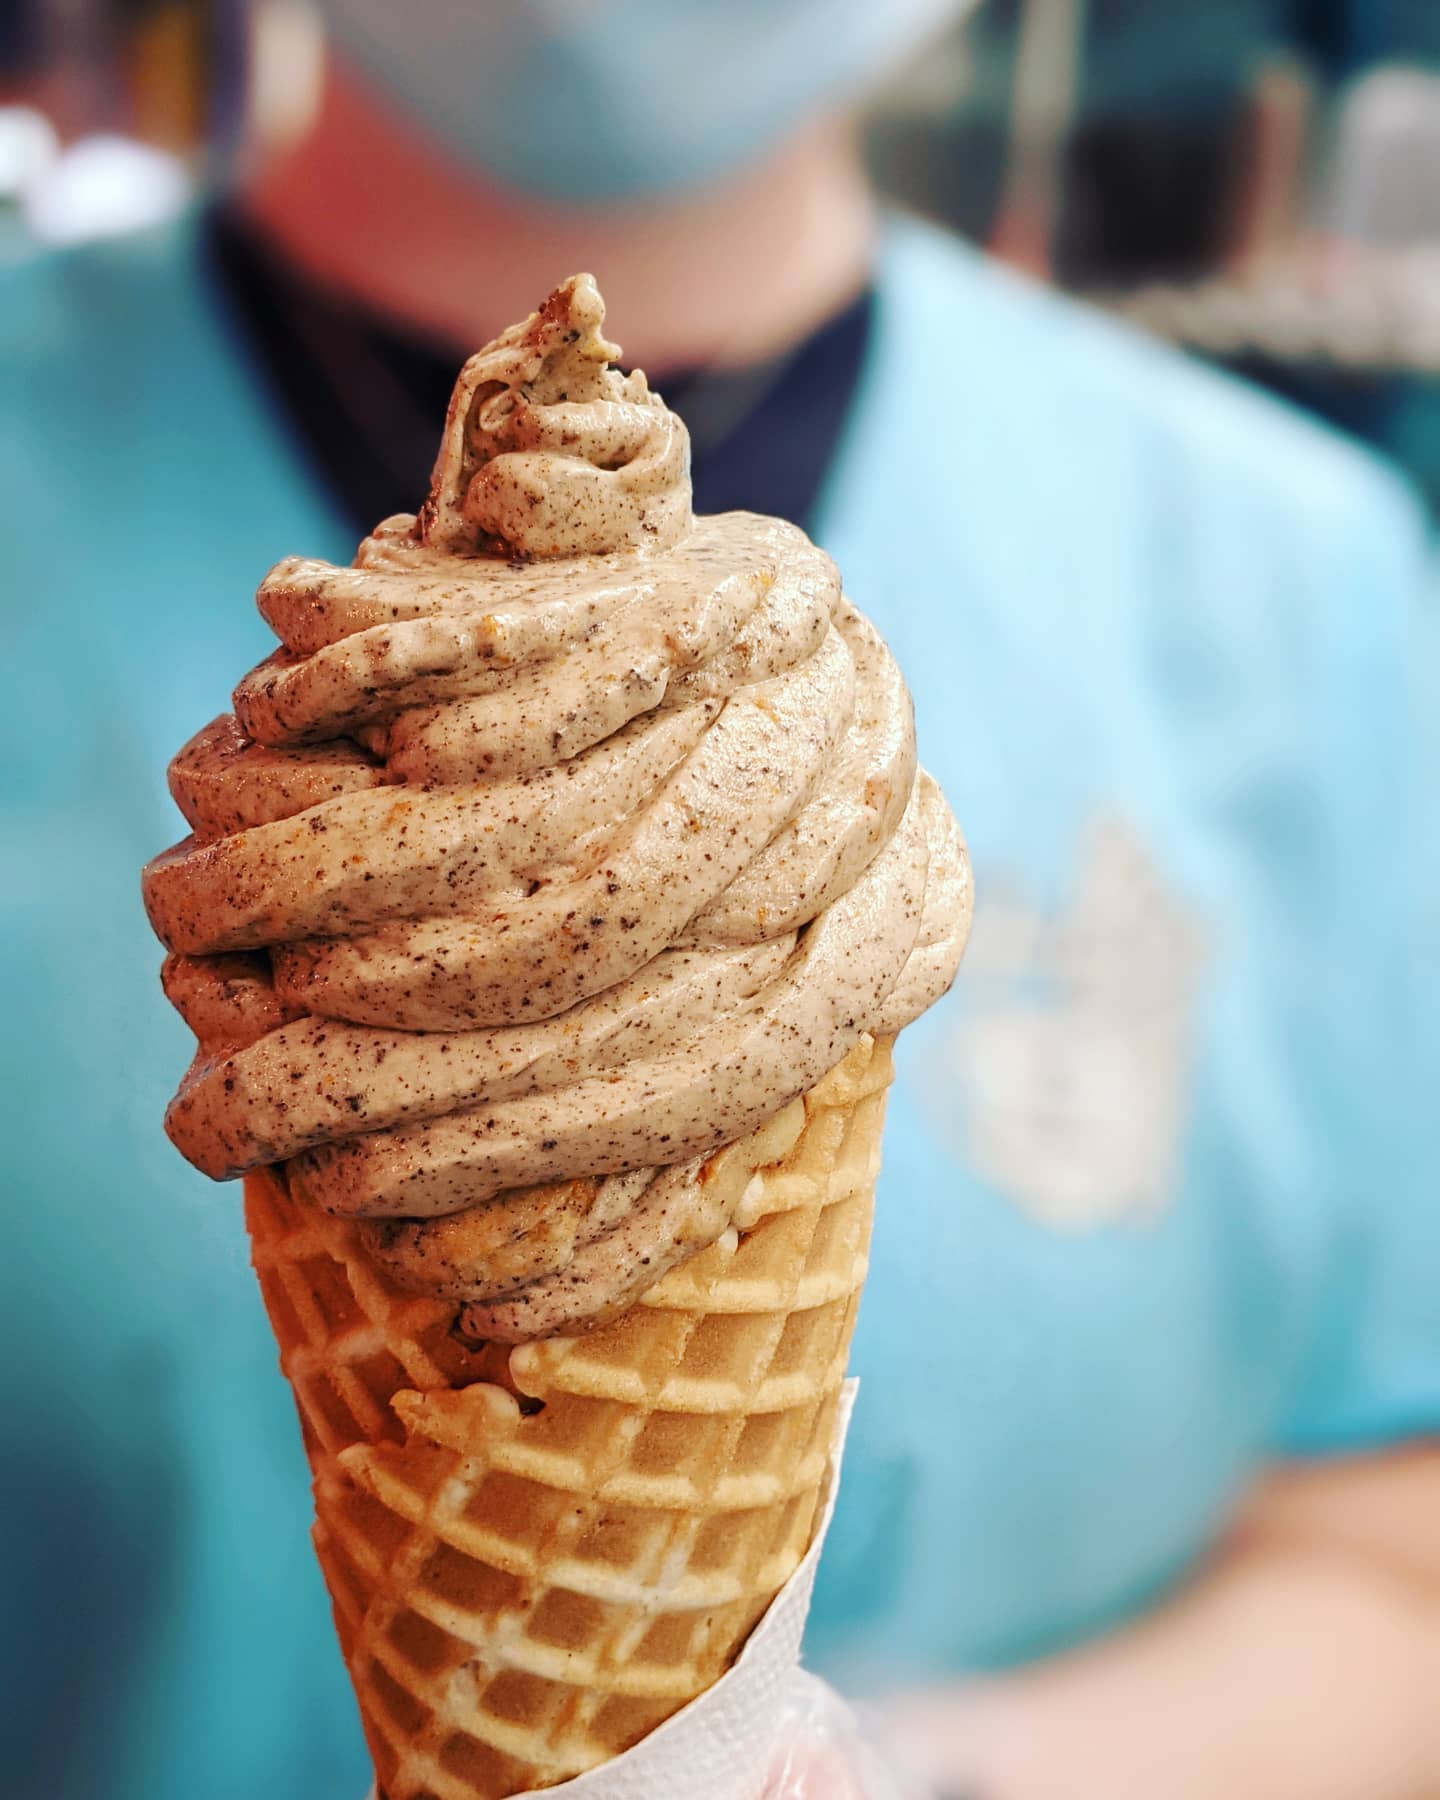 Non-dairy Banana Cream with Oreo and peanut butter served in a waffle cone